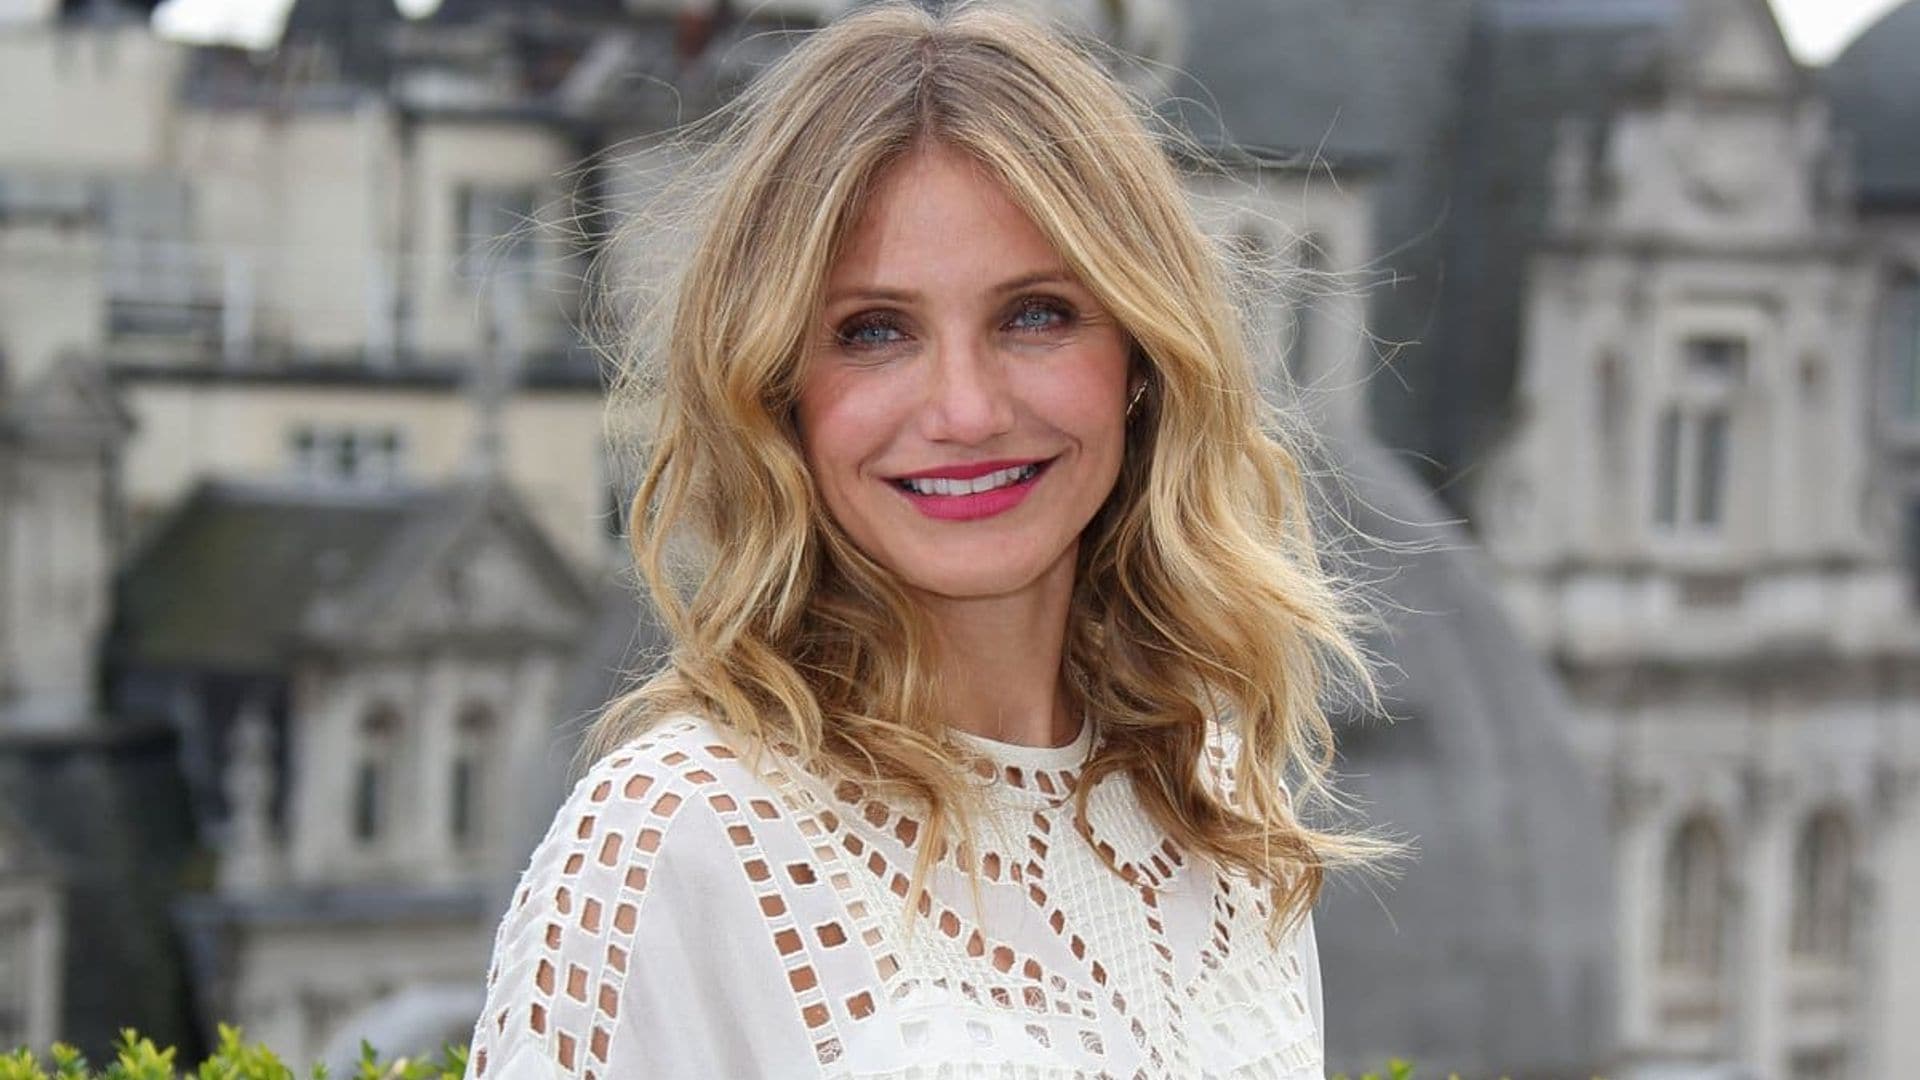 Cameron Diaz is content with not having an acting role in seven years